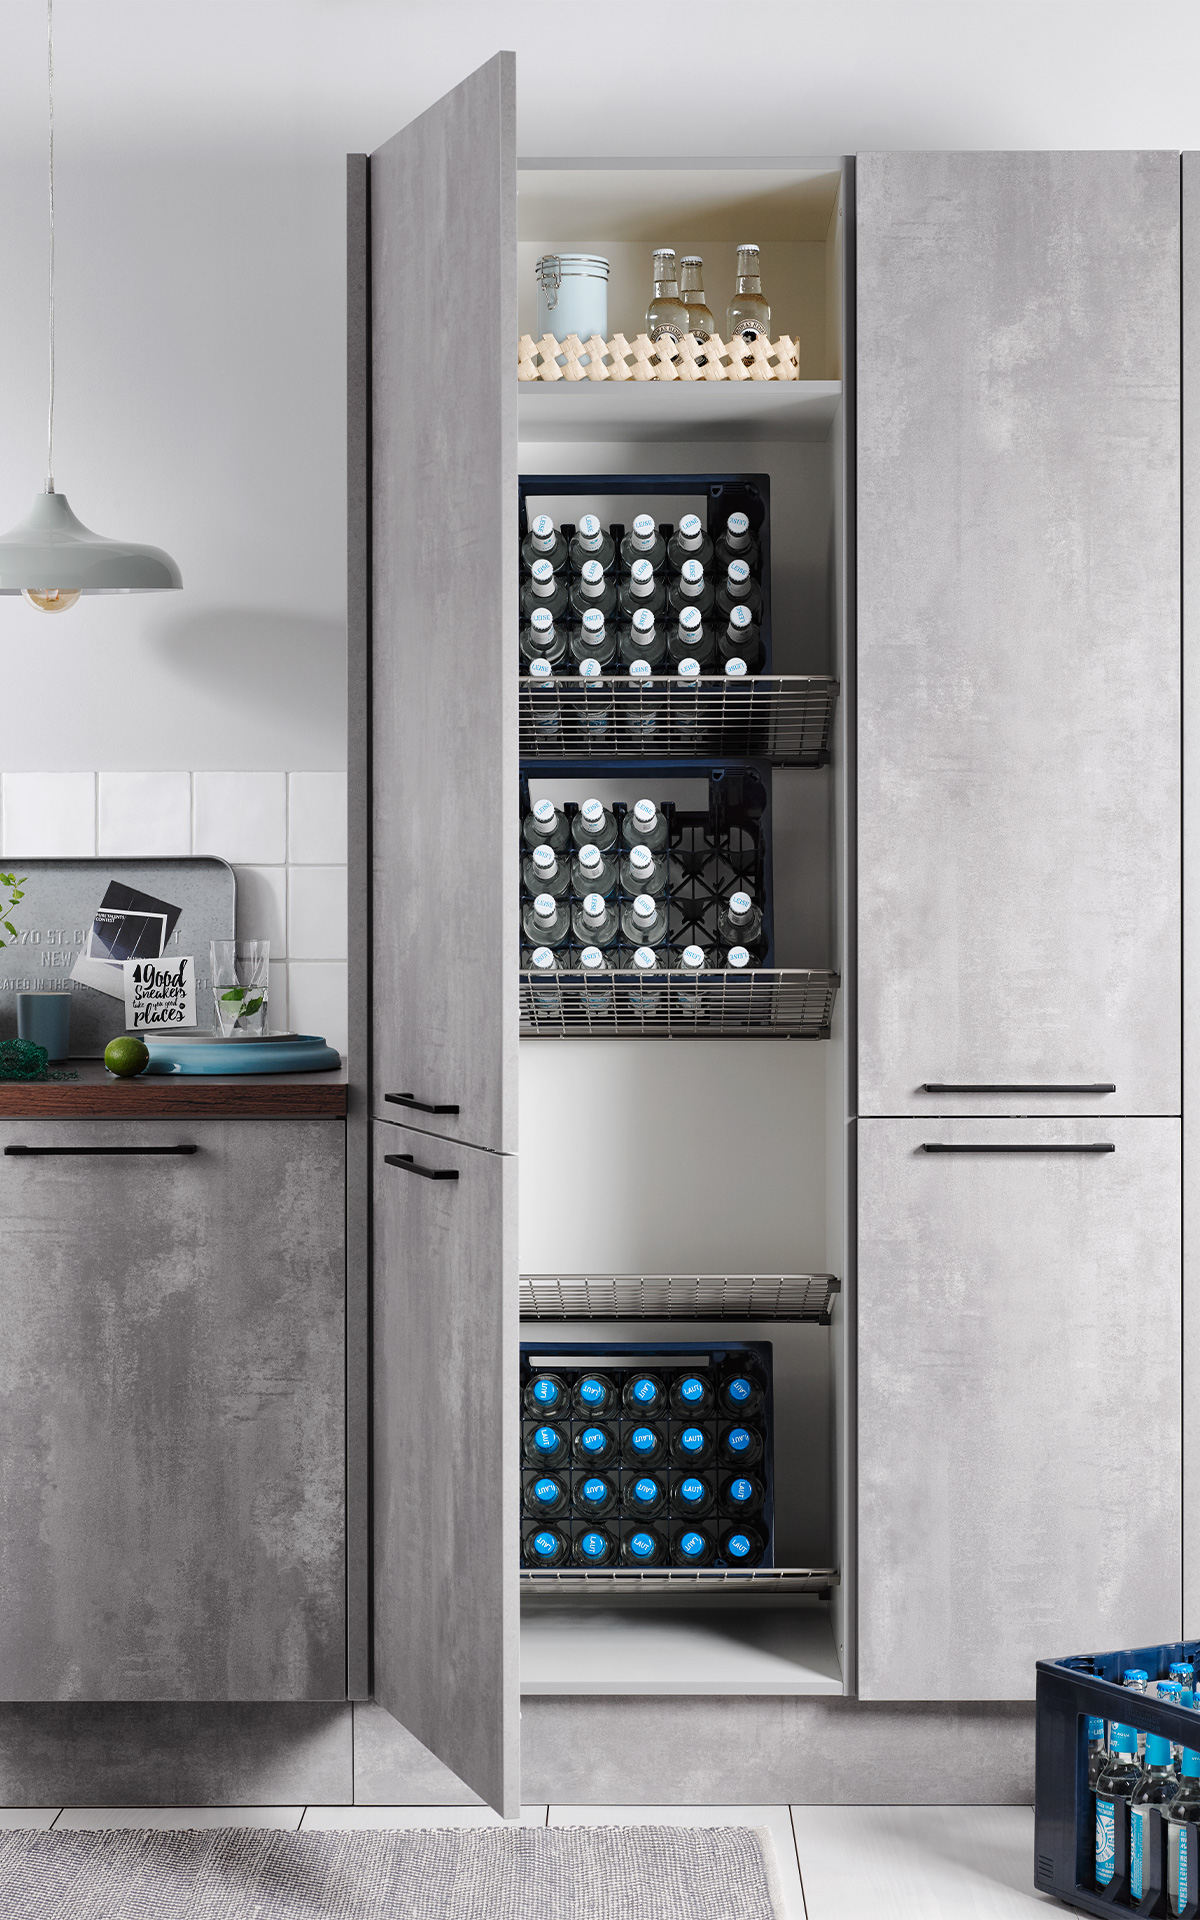 spatial smart Interior with organisation new for Your kitchen. miracle organisation becomes from your kitchen a Häcker